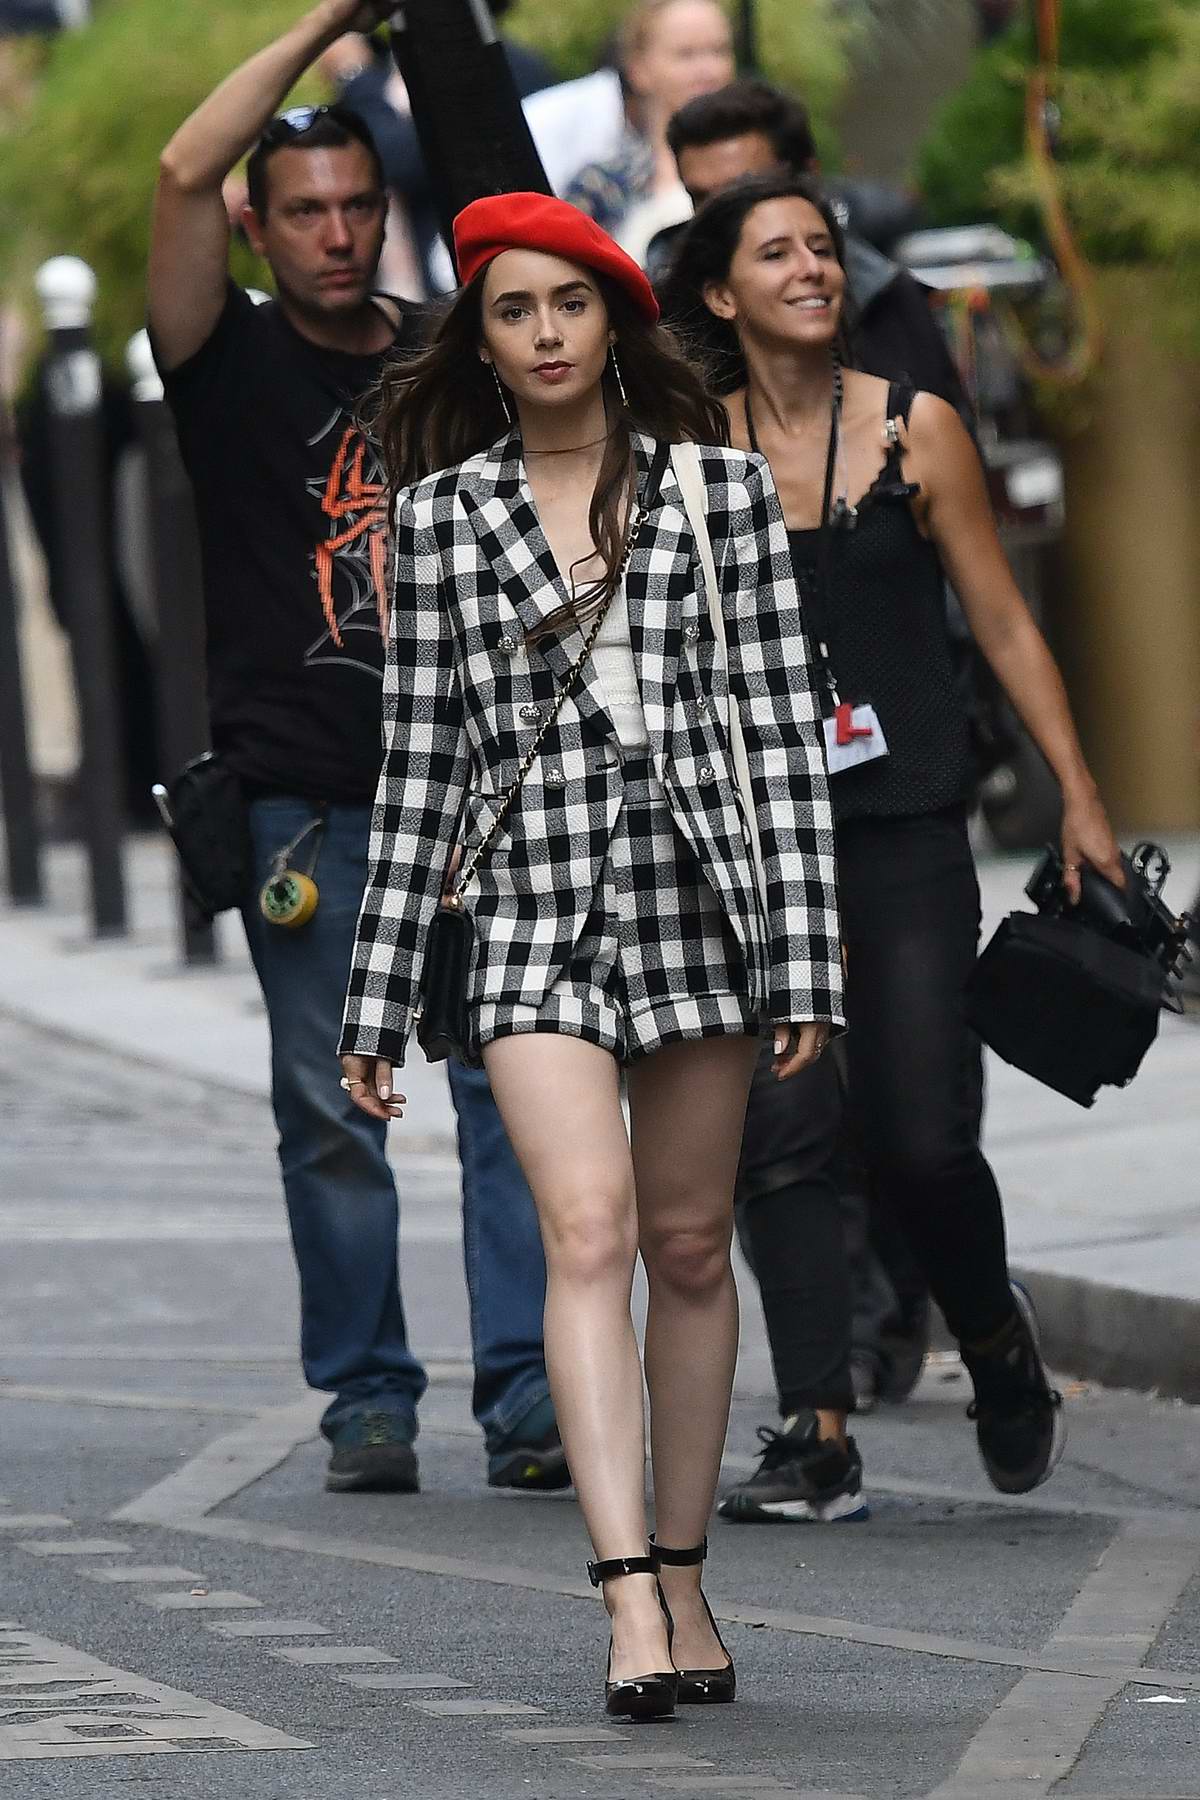 lily-collins-spotted-in-multiple-outfits-while-filming-her-upcoming-emily-in-paris-tv-show-in-paris-france-140819_11.jpg